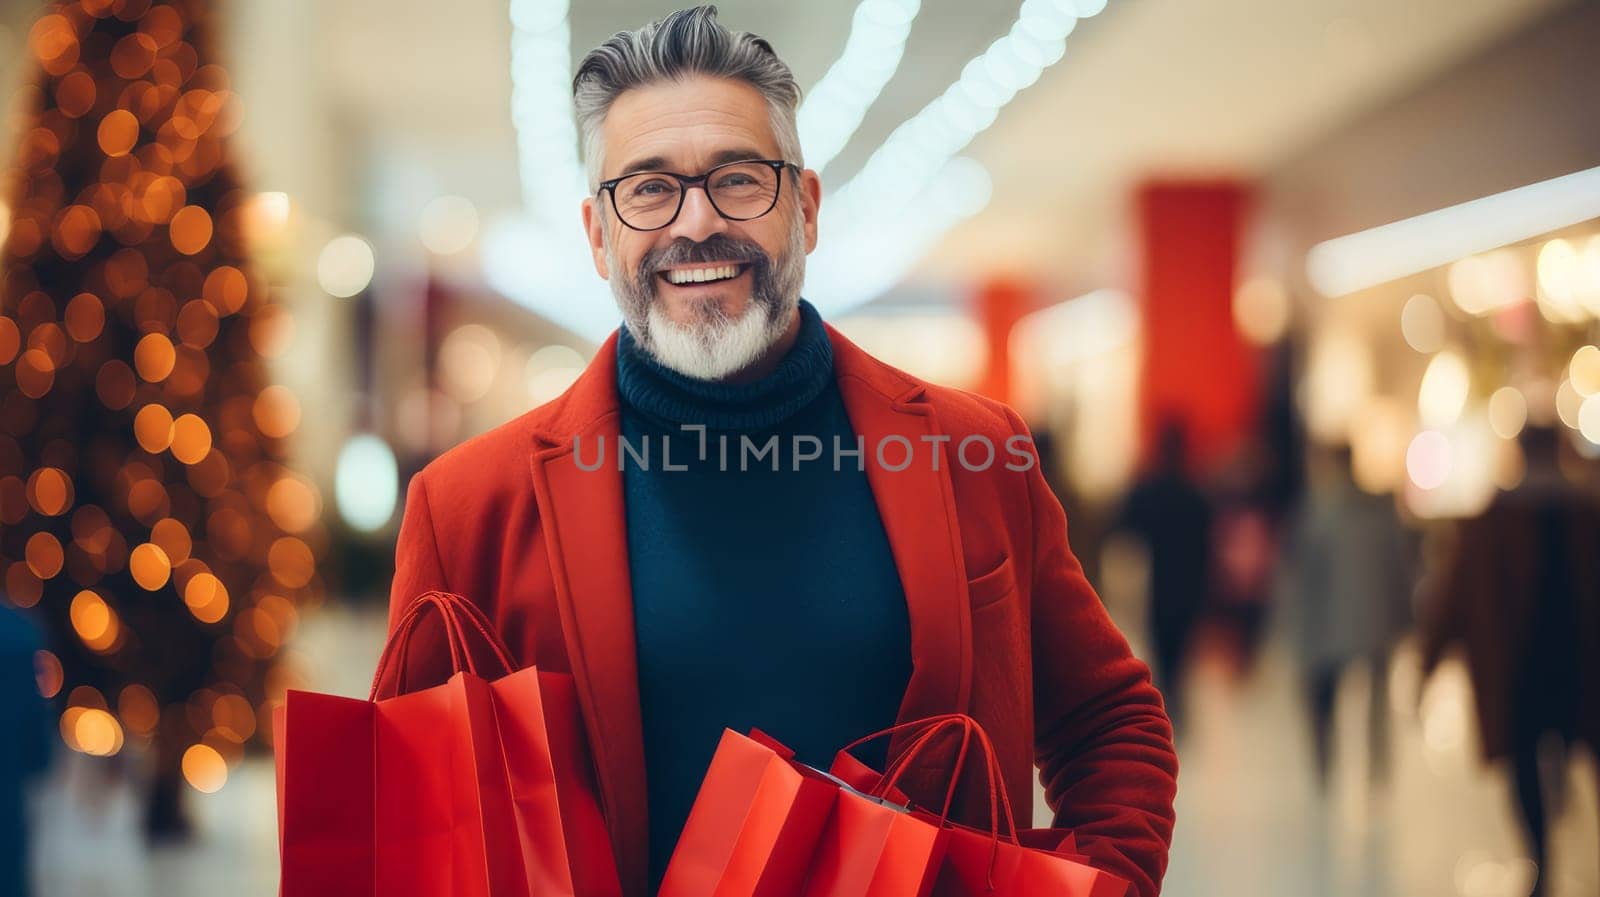 Smiling middle aged man with Christmas gifts in shopping bags in a shopping mall. Christmas sale concept by Alla_Yurtayeva